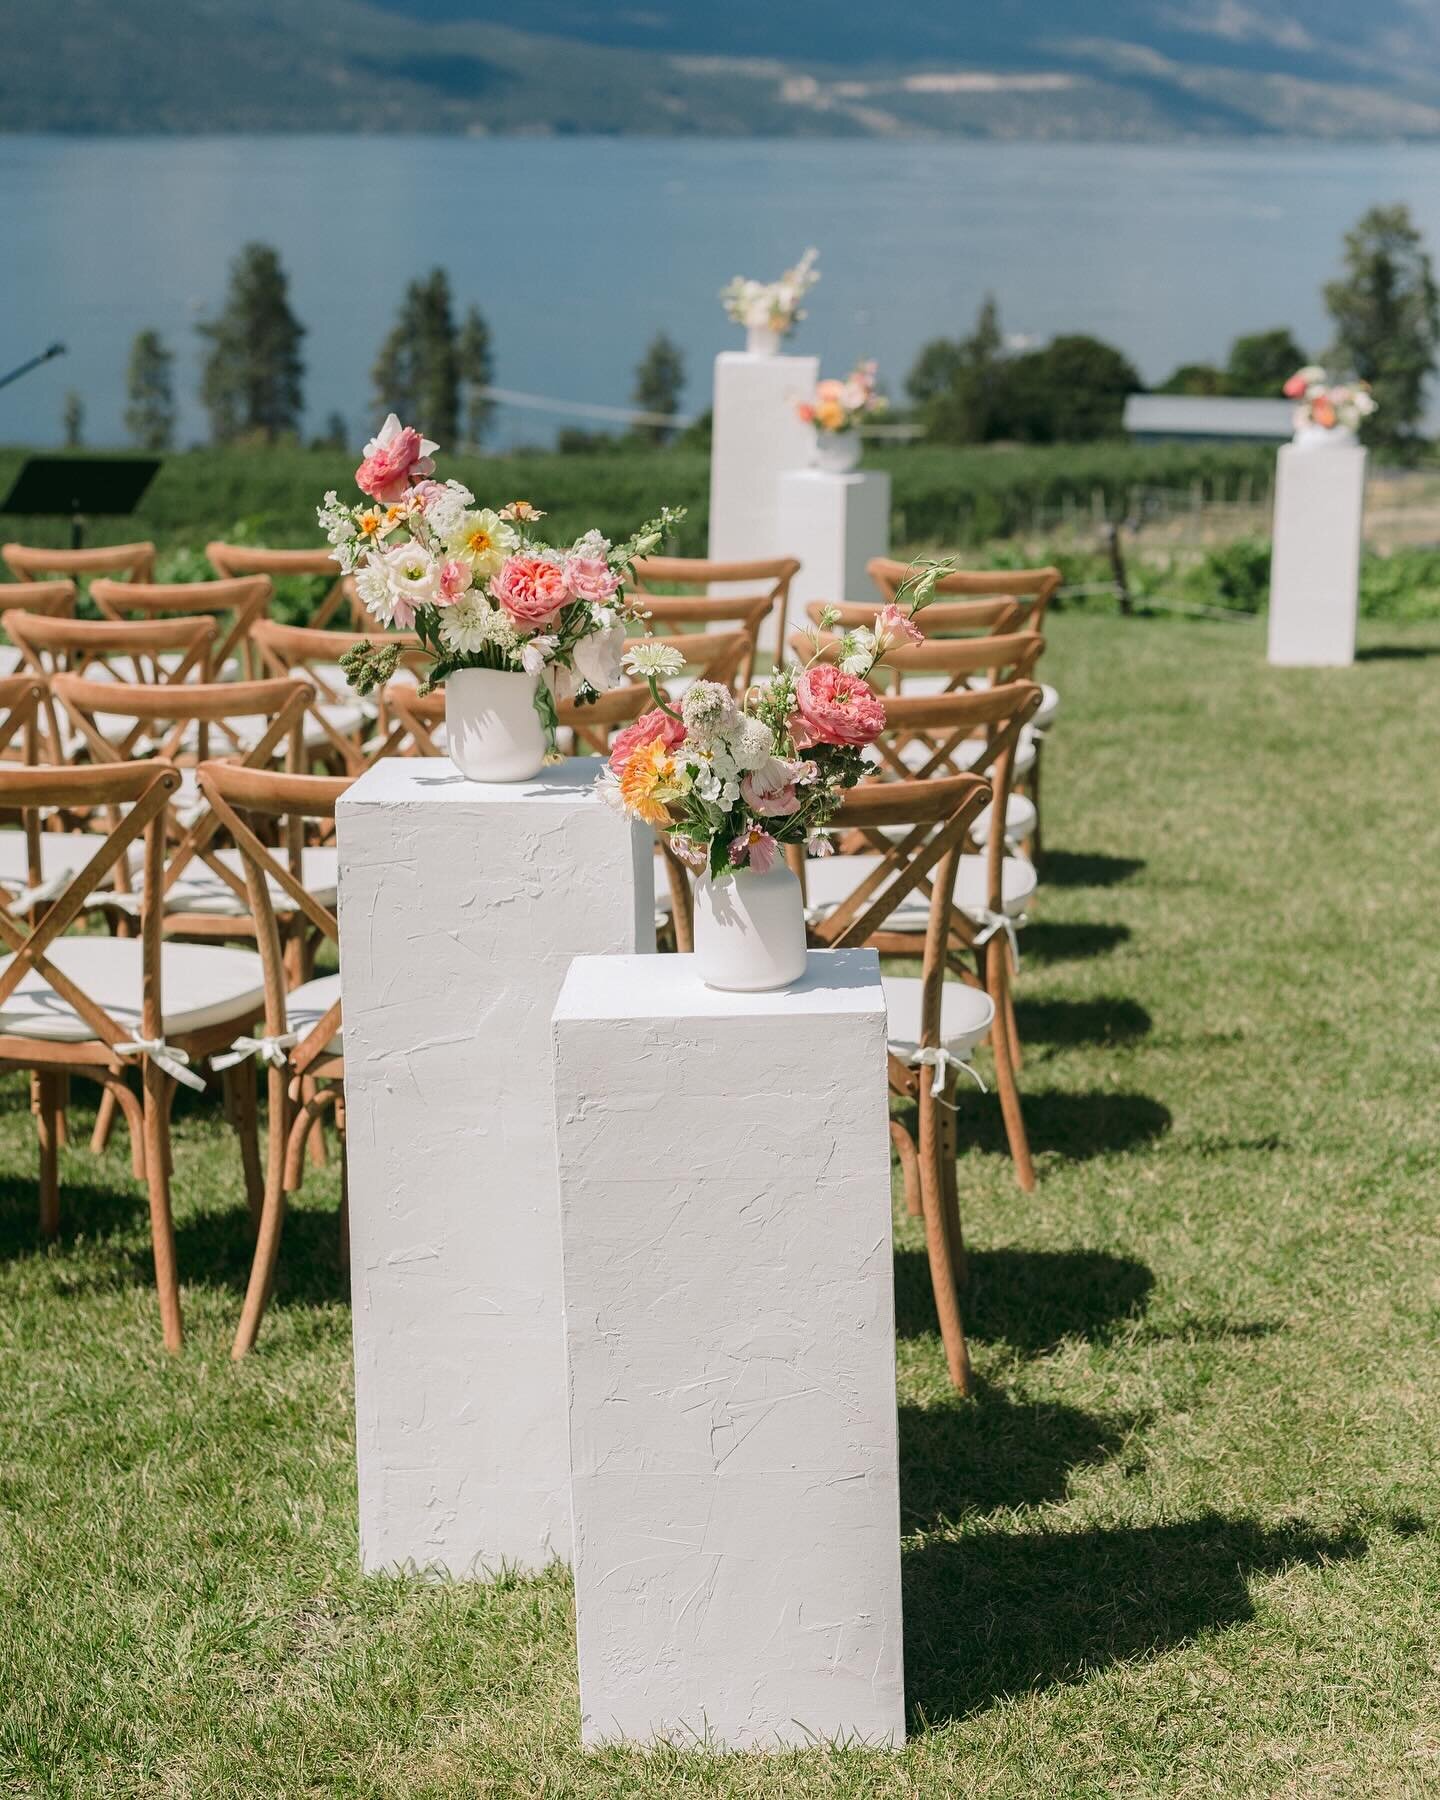 Plinth arrangements make such a great visual impact and I am here for it! They are definitely one of my favourite pieces that can be used in both ceremonies and receptions! Multipurpose arrangements are the best! 

Still drooling over this palette, w